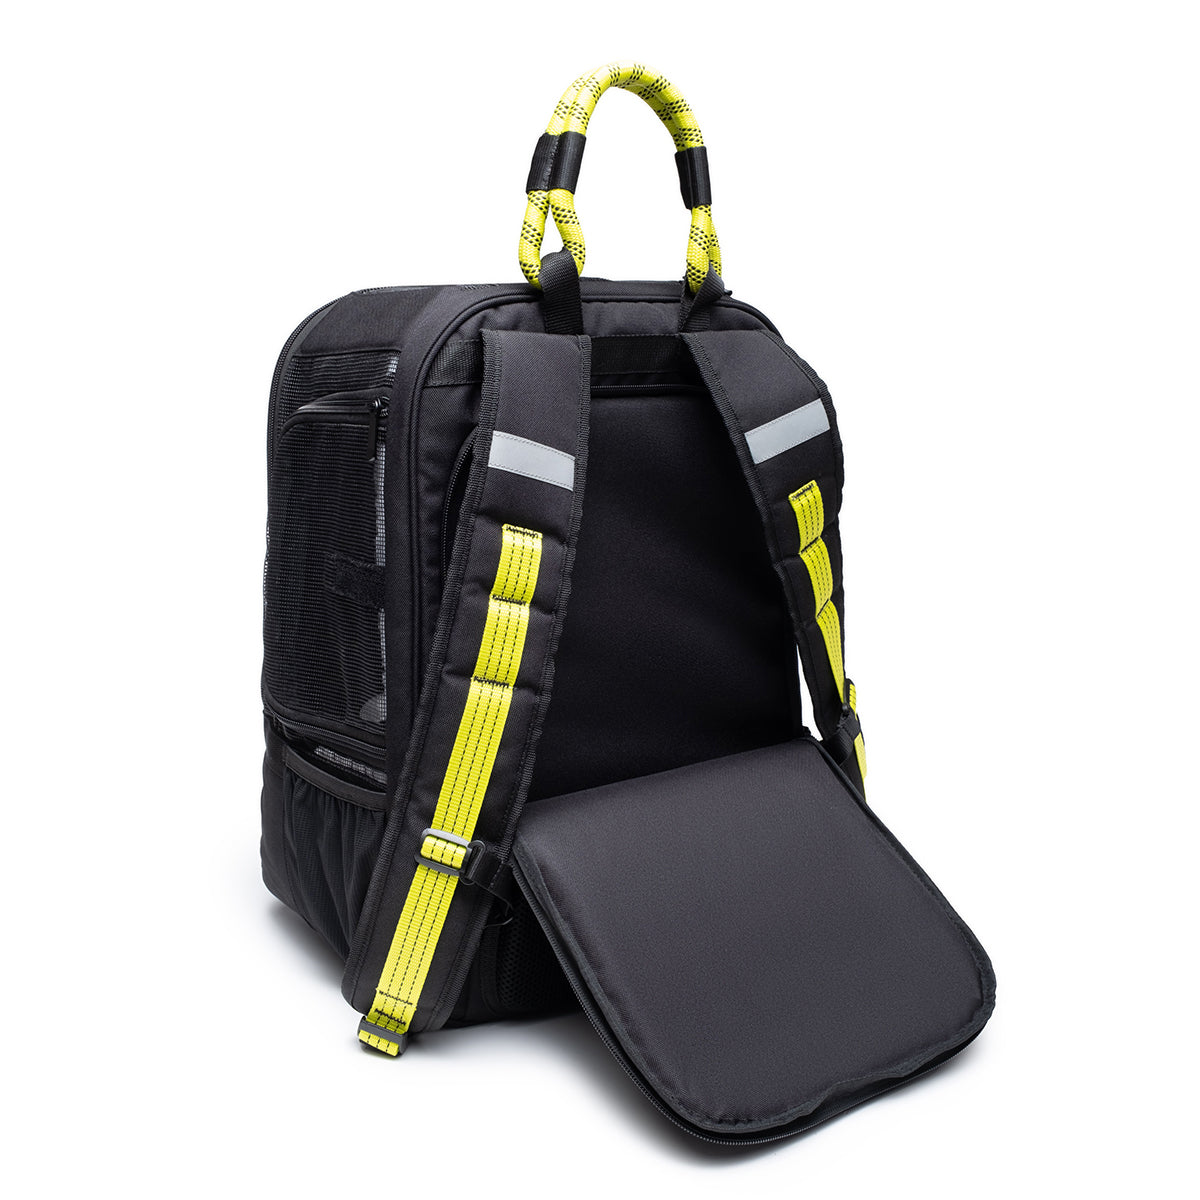 Cat Backpacks that are Carry-On Airline and Fly Compliant for Adventur